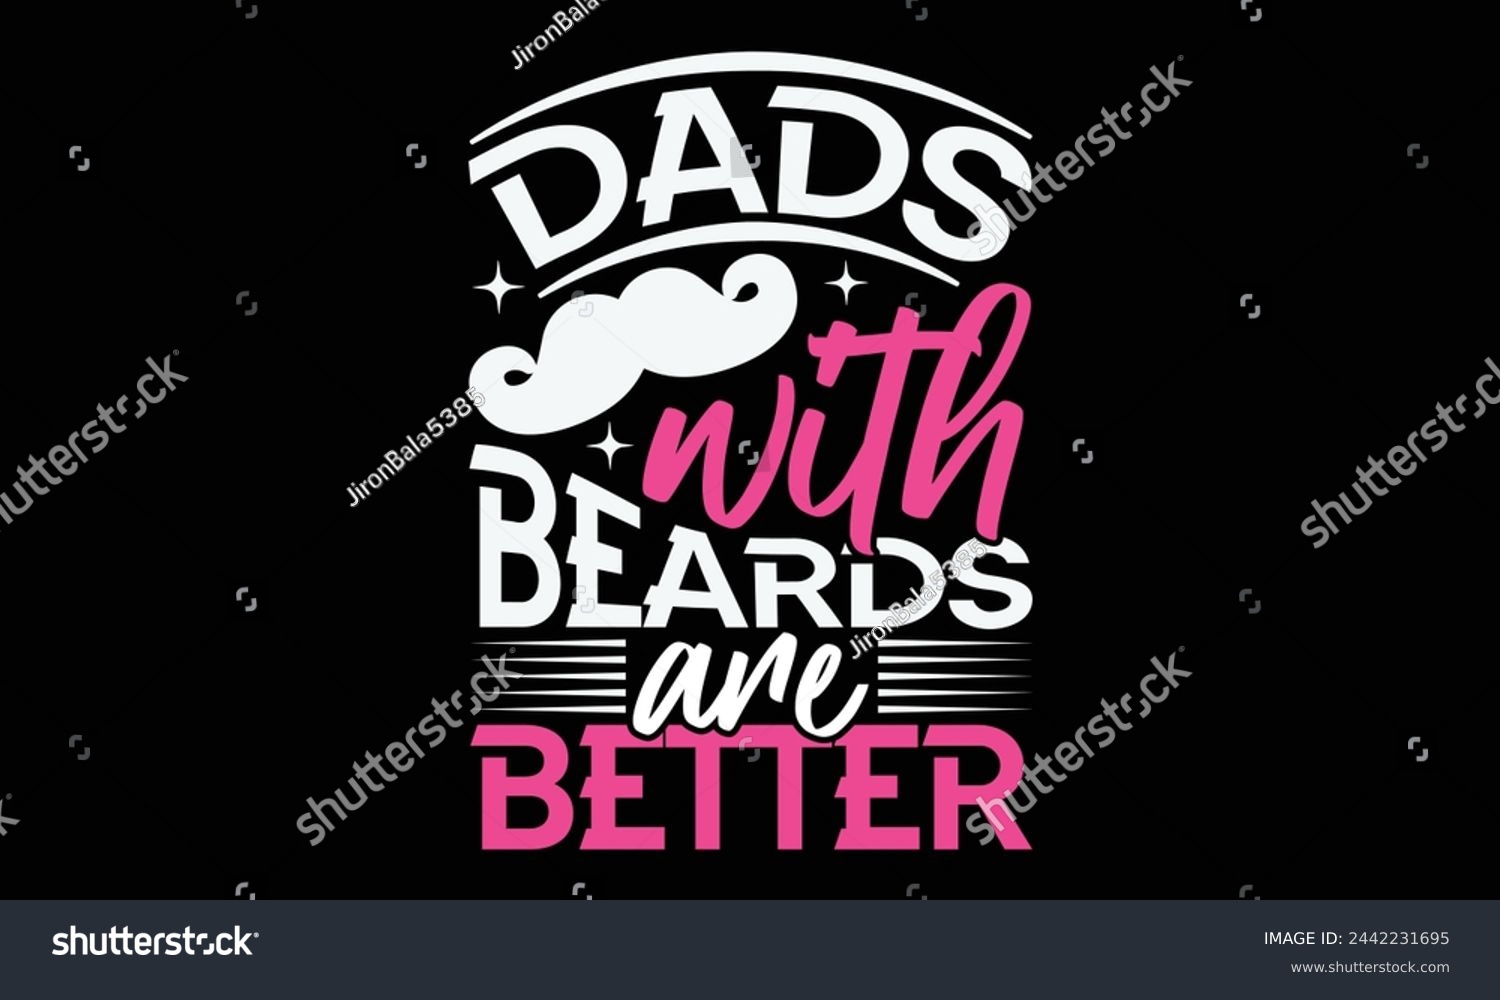 SVG of Dads with beards are better - Mom t-shirt design, isolated on white background, this illustration can be used as a print on t-shirts and bags, cover book, template, stationary or as a poster. svg